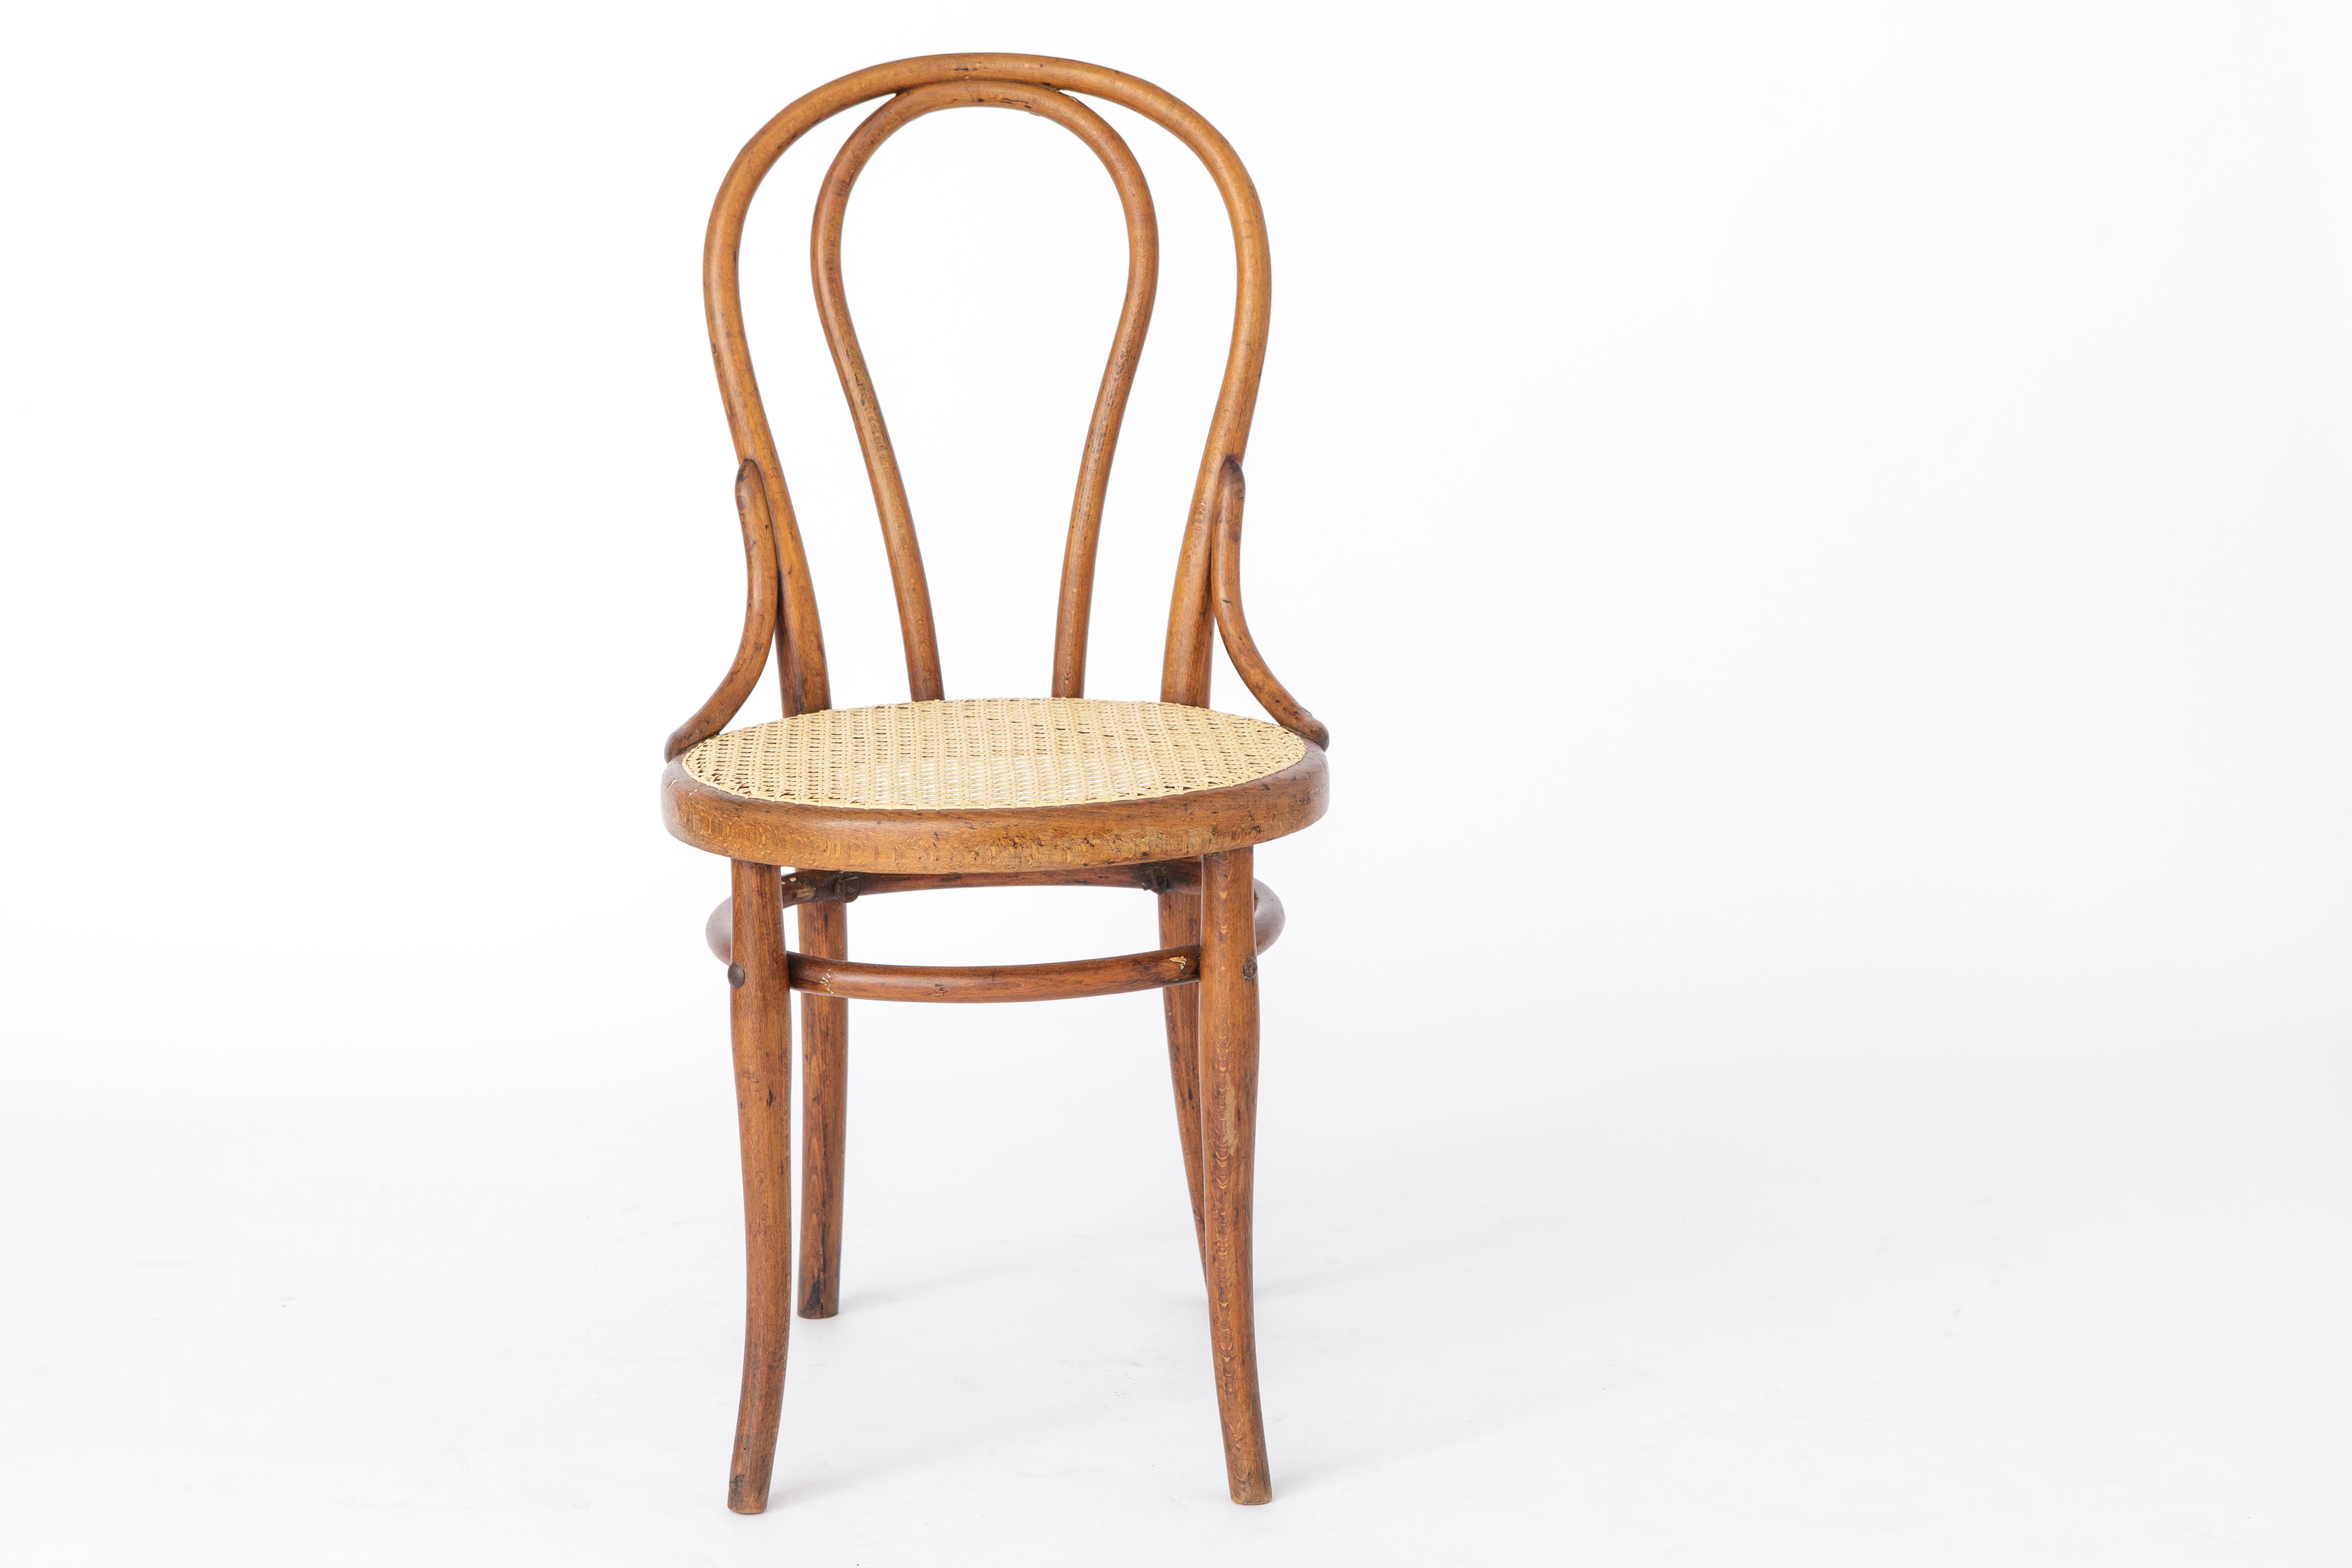 Thonet bentwood chair, Model No. 18 from 1890. 
Production period: approx. 1920s-1940s. 

Stable dyed beech wood frame. 
Some distinct sings of use. See pictures. 
Sturdy frame. Renewed Viennese hand cane weaving. 
Thonet stamp under the seat.